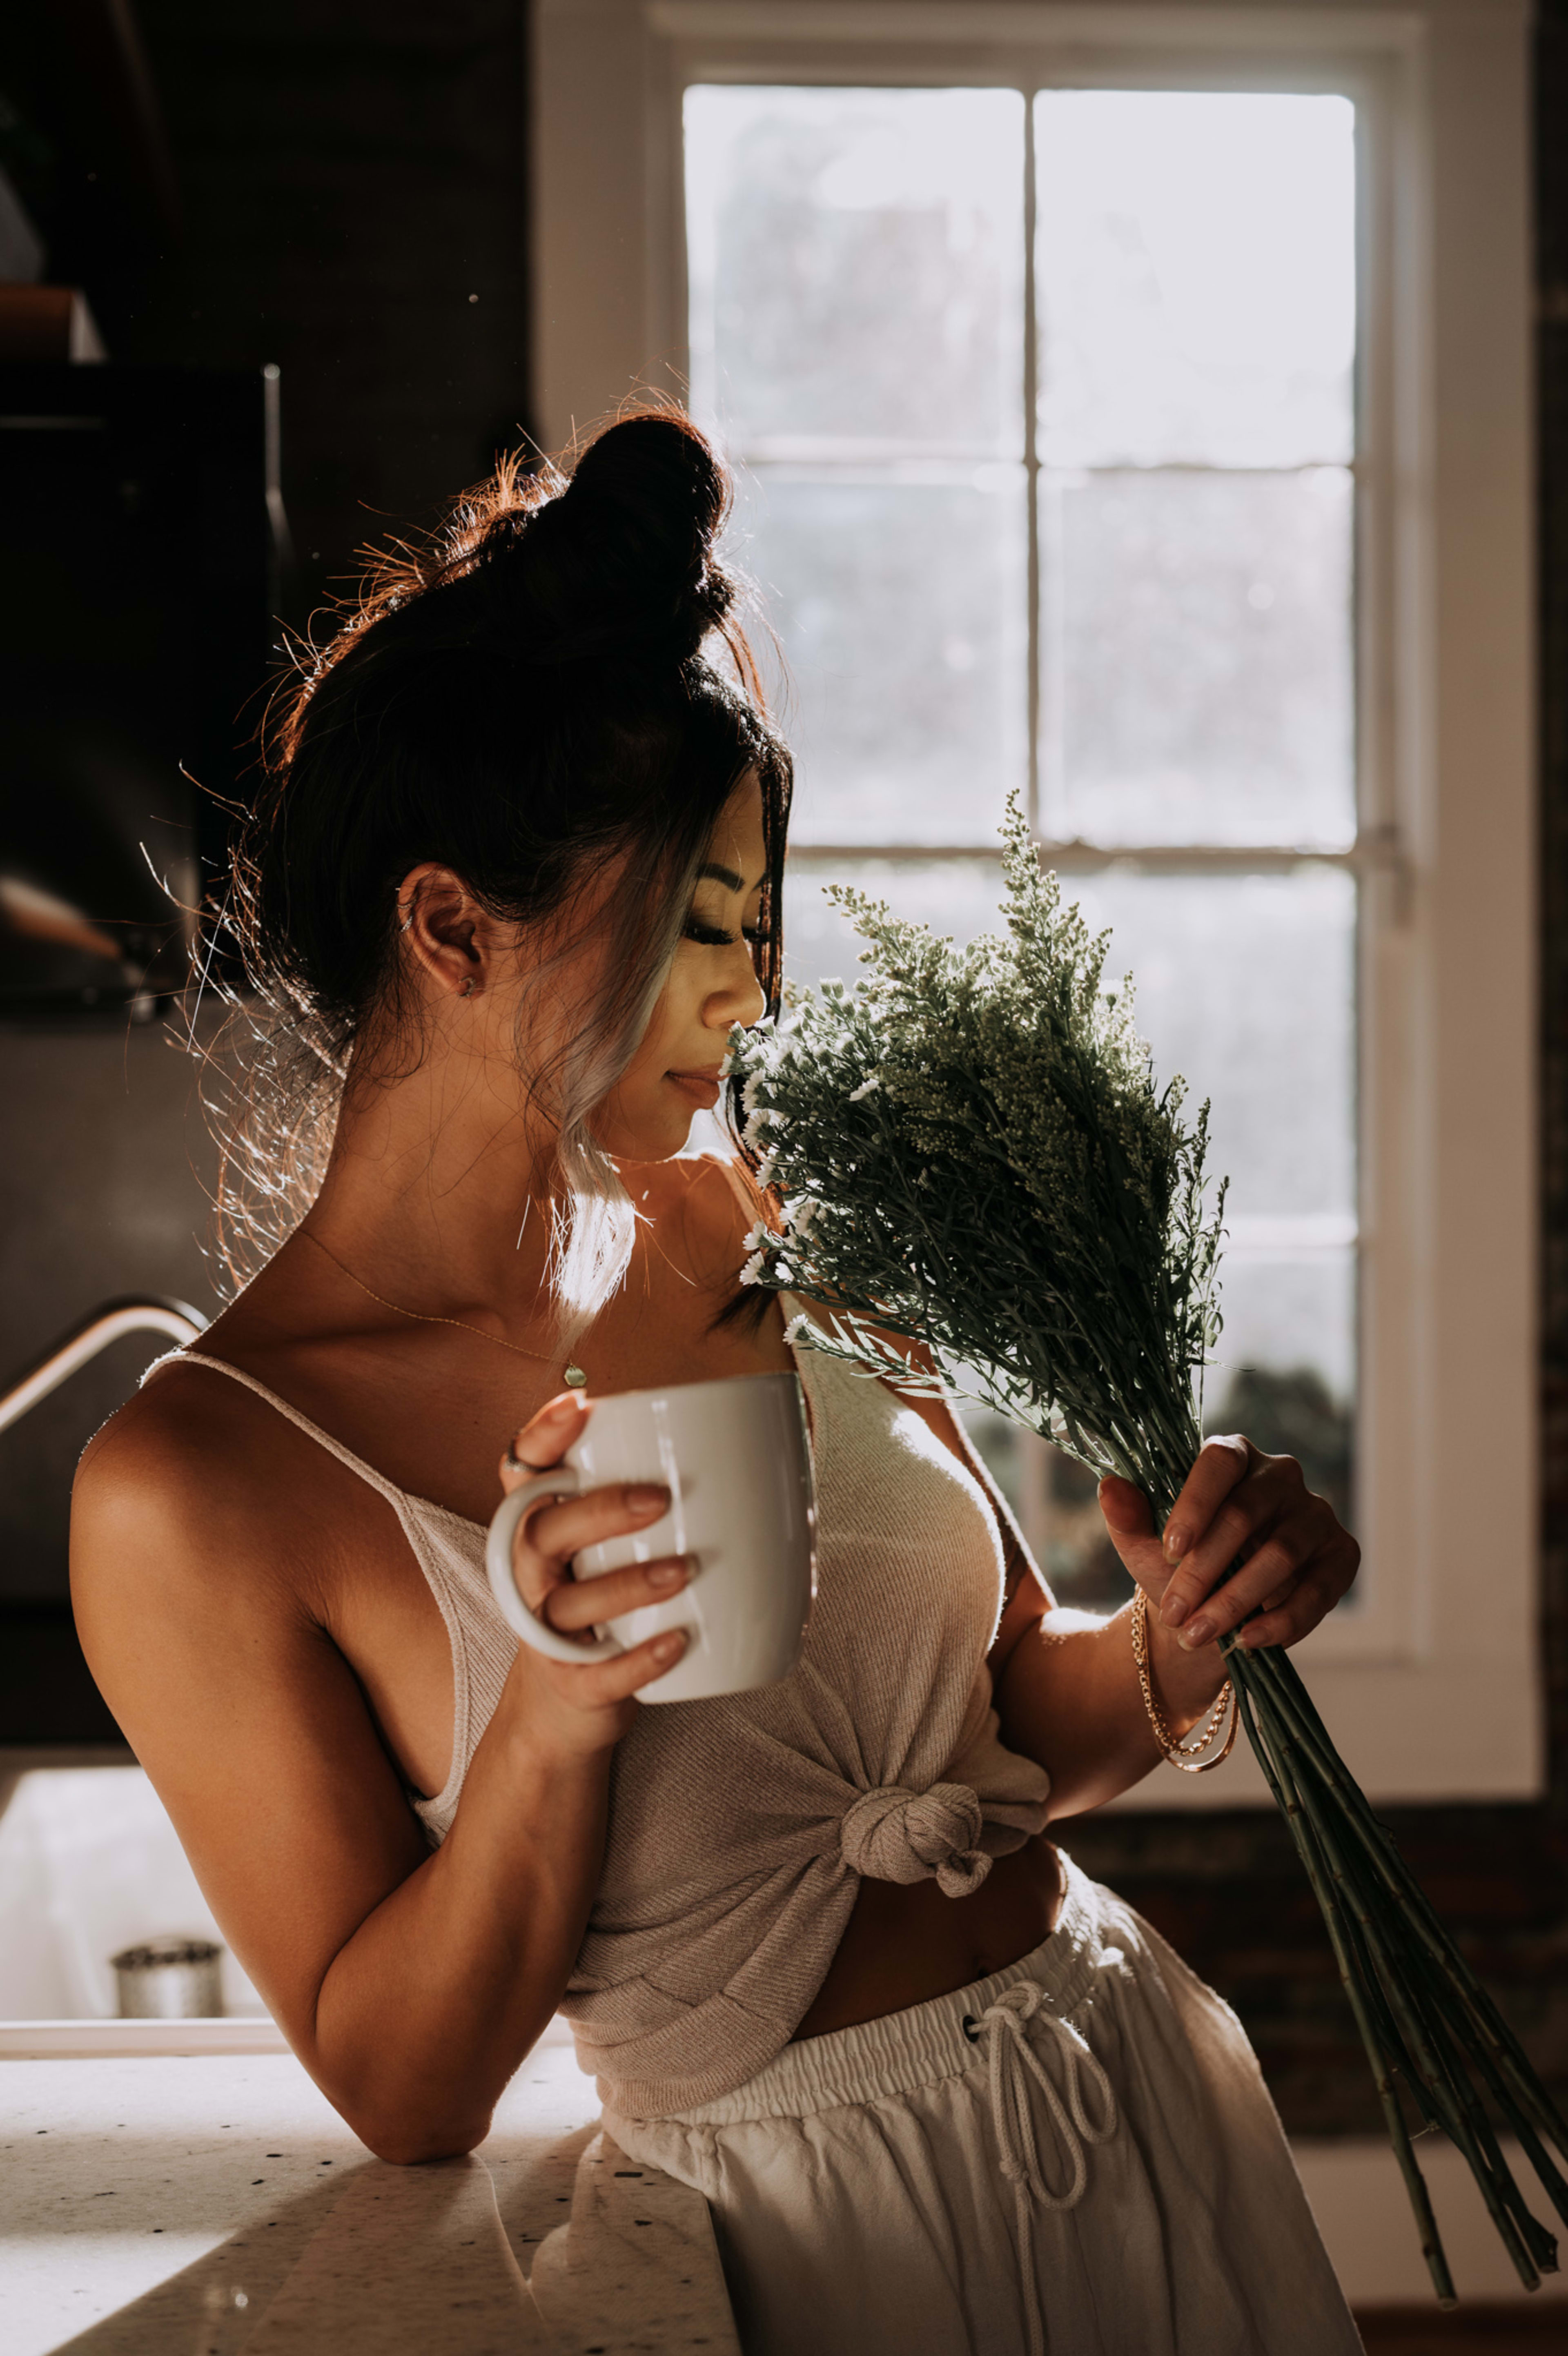 A photo shoot featuring a woman holding a cup of coffee and flowers.